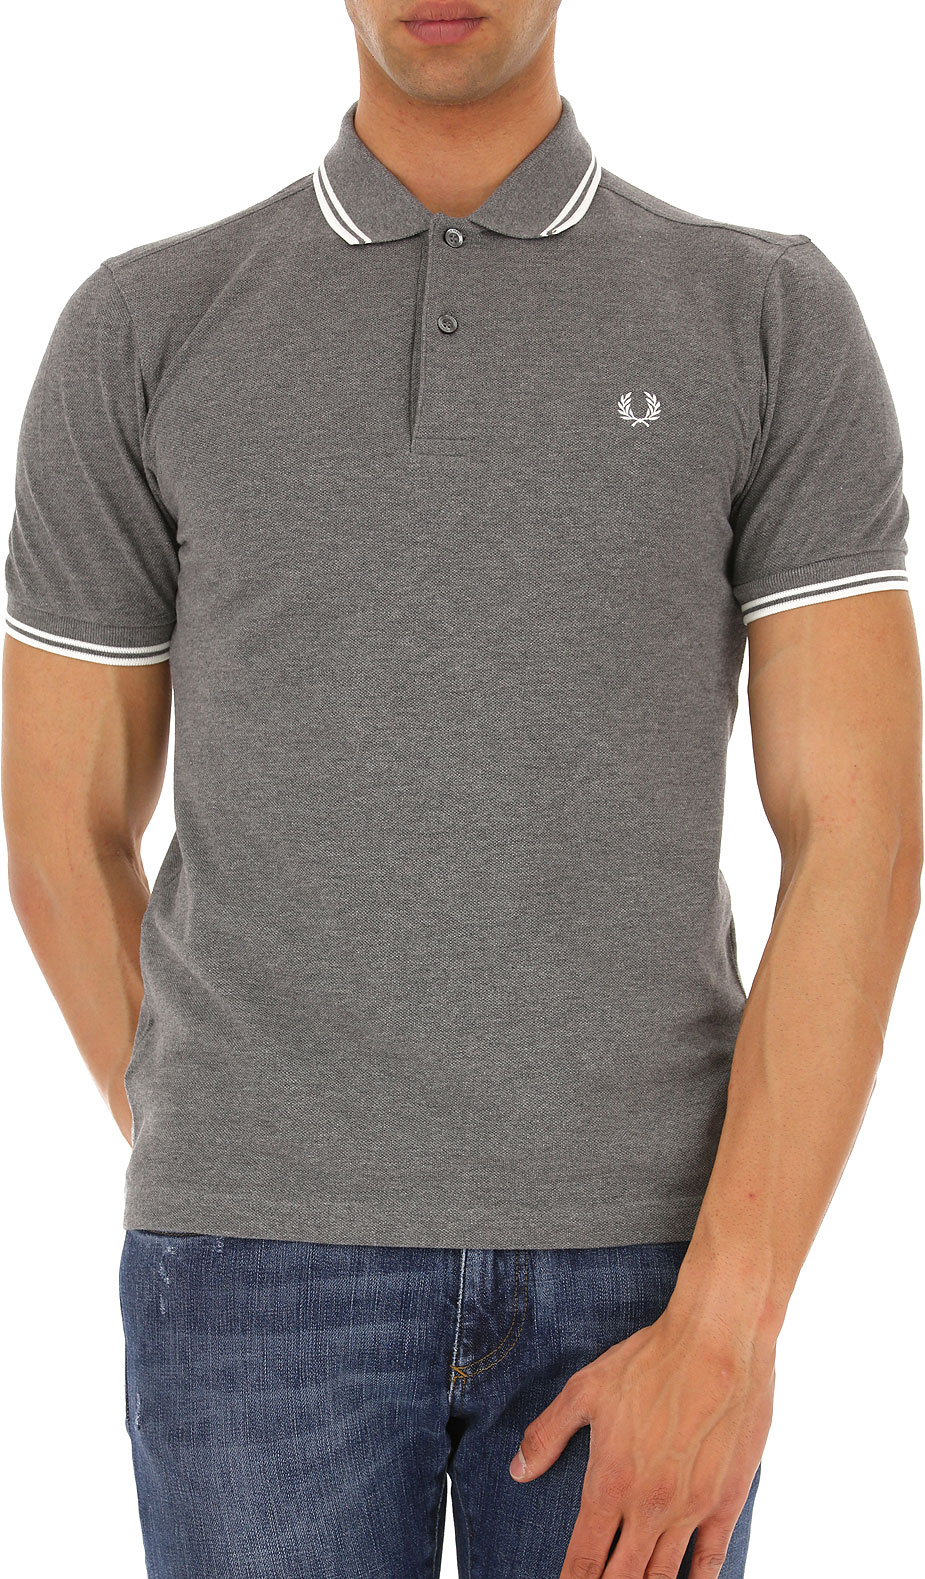 Mens Clothing Fred Perry, Style code: m3600-e30-